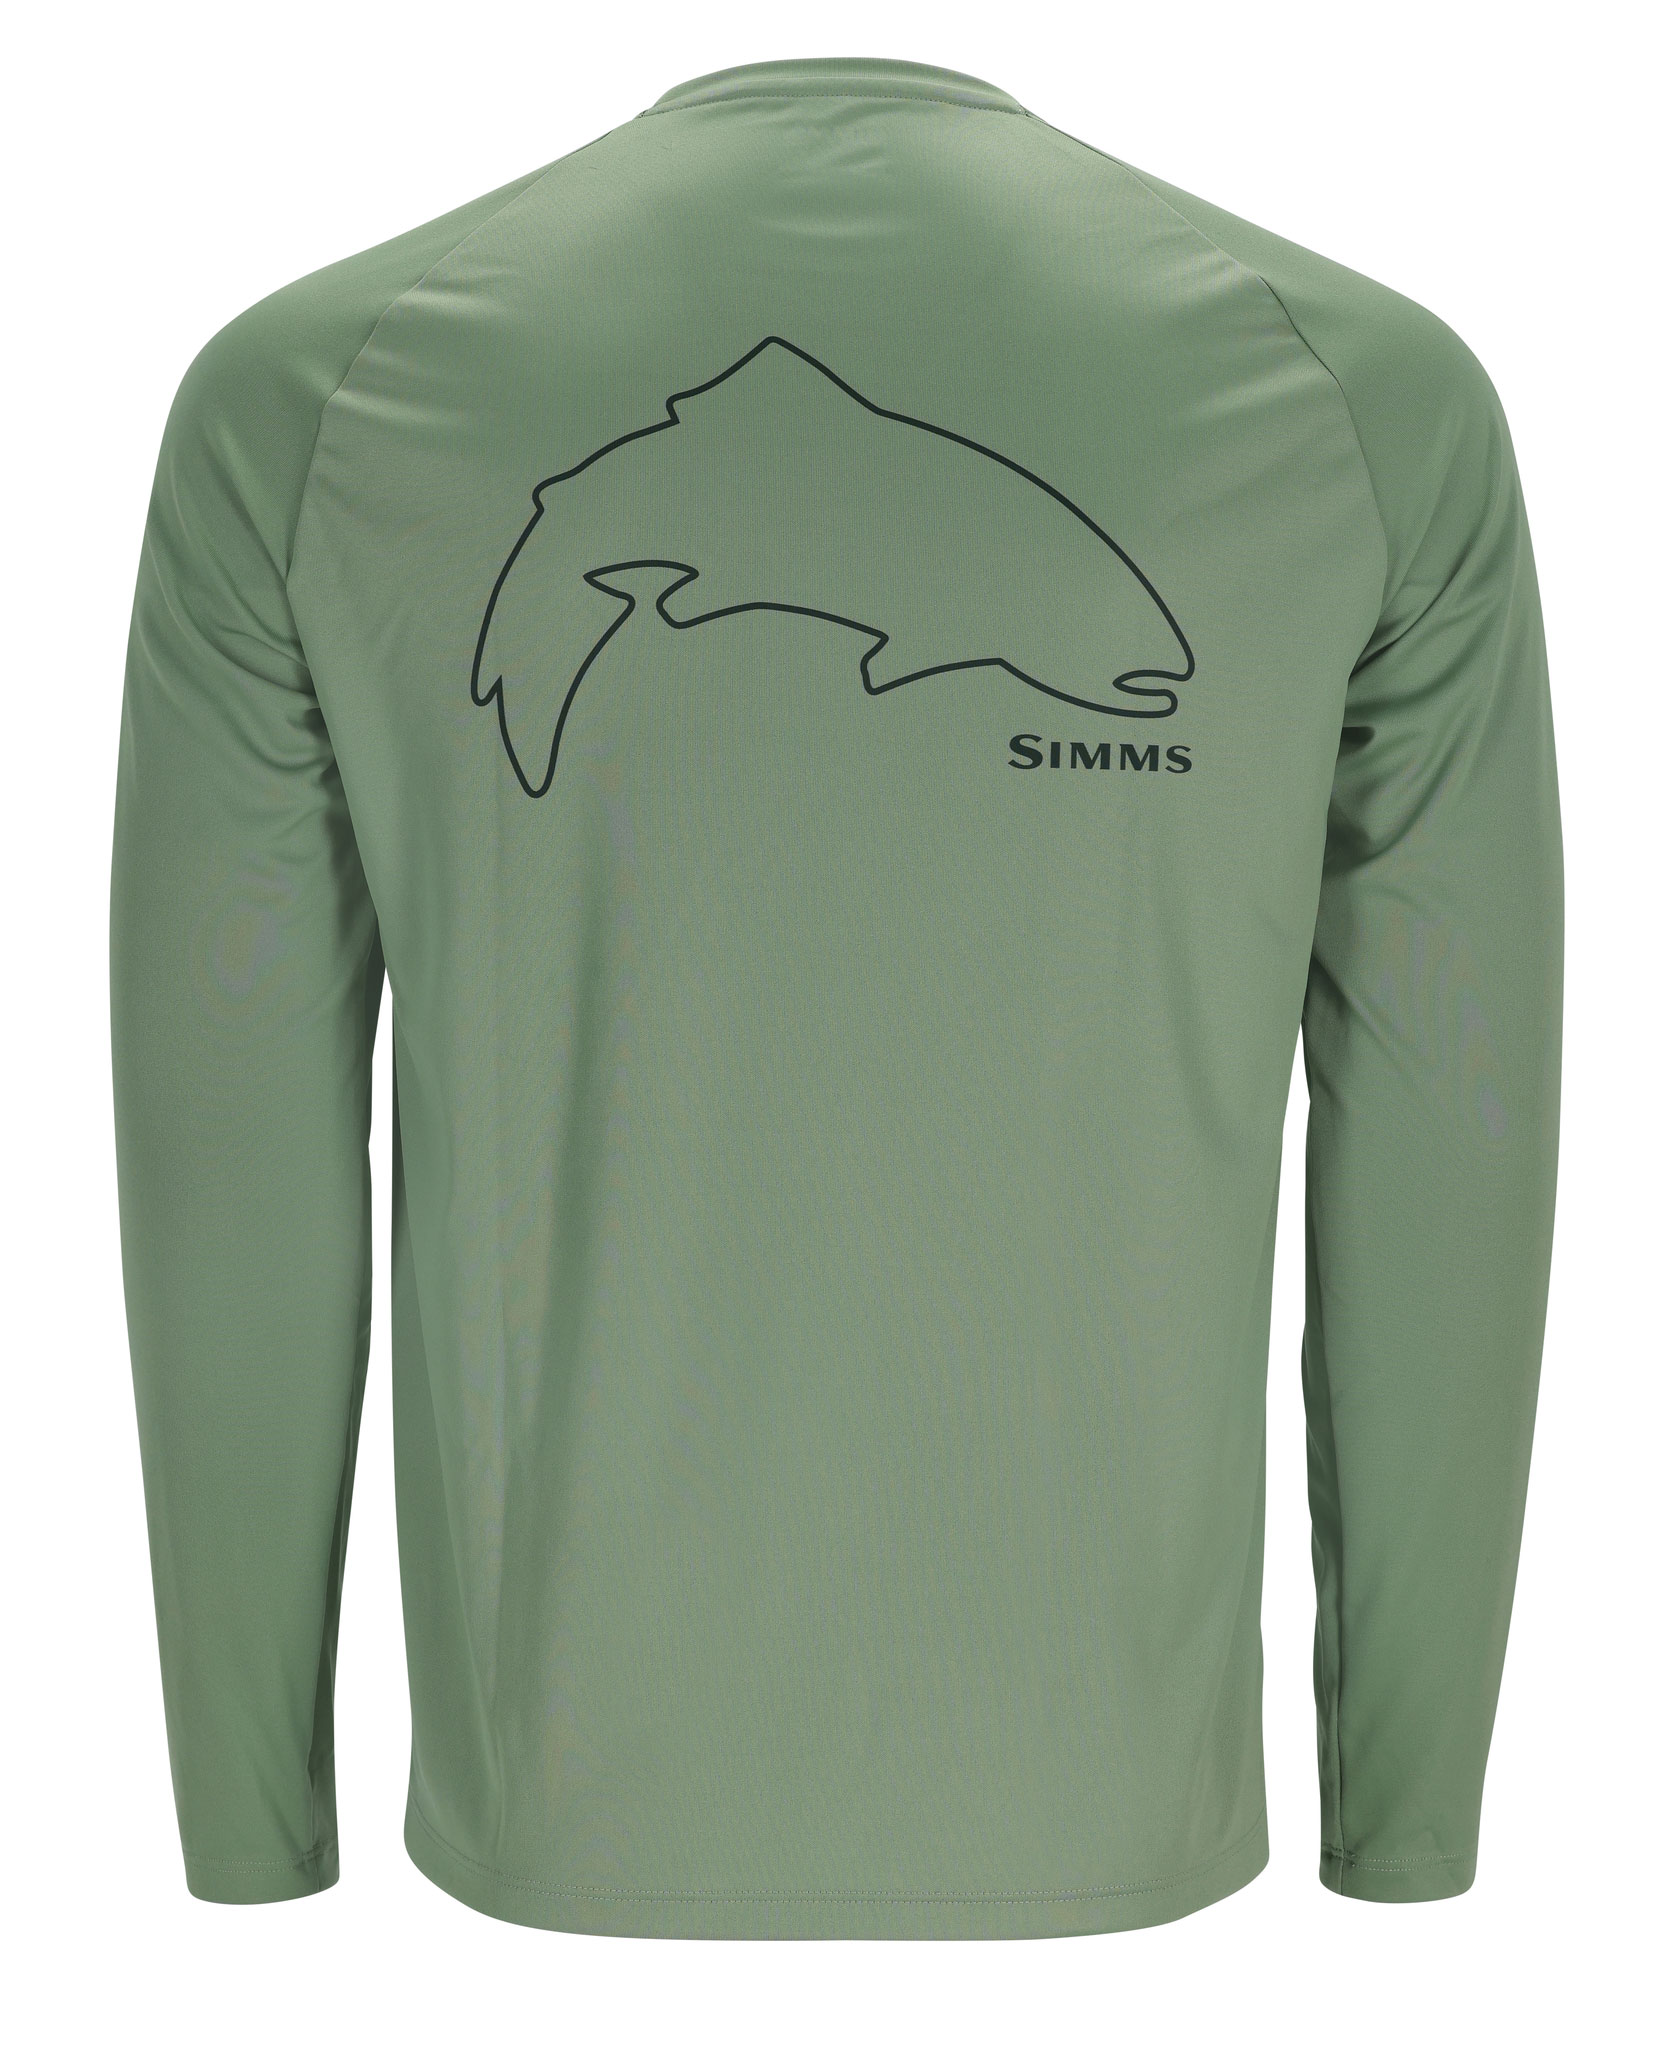 Fishing Shirt Outfitters - Angler's Collection: Tarpon - UPF 50+ Long Sleeve